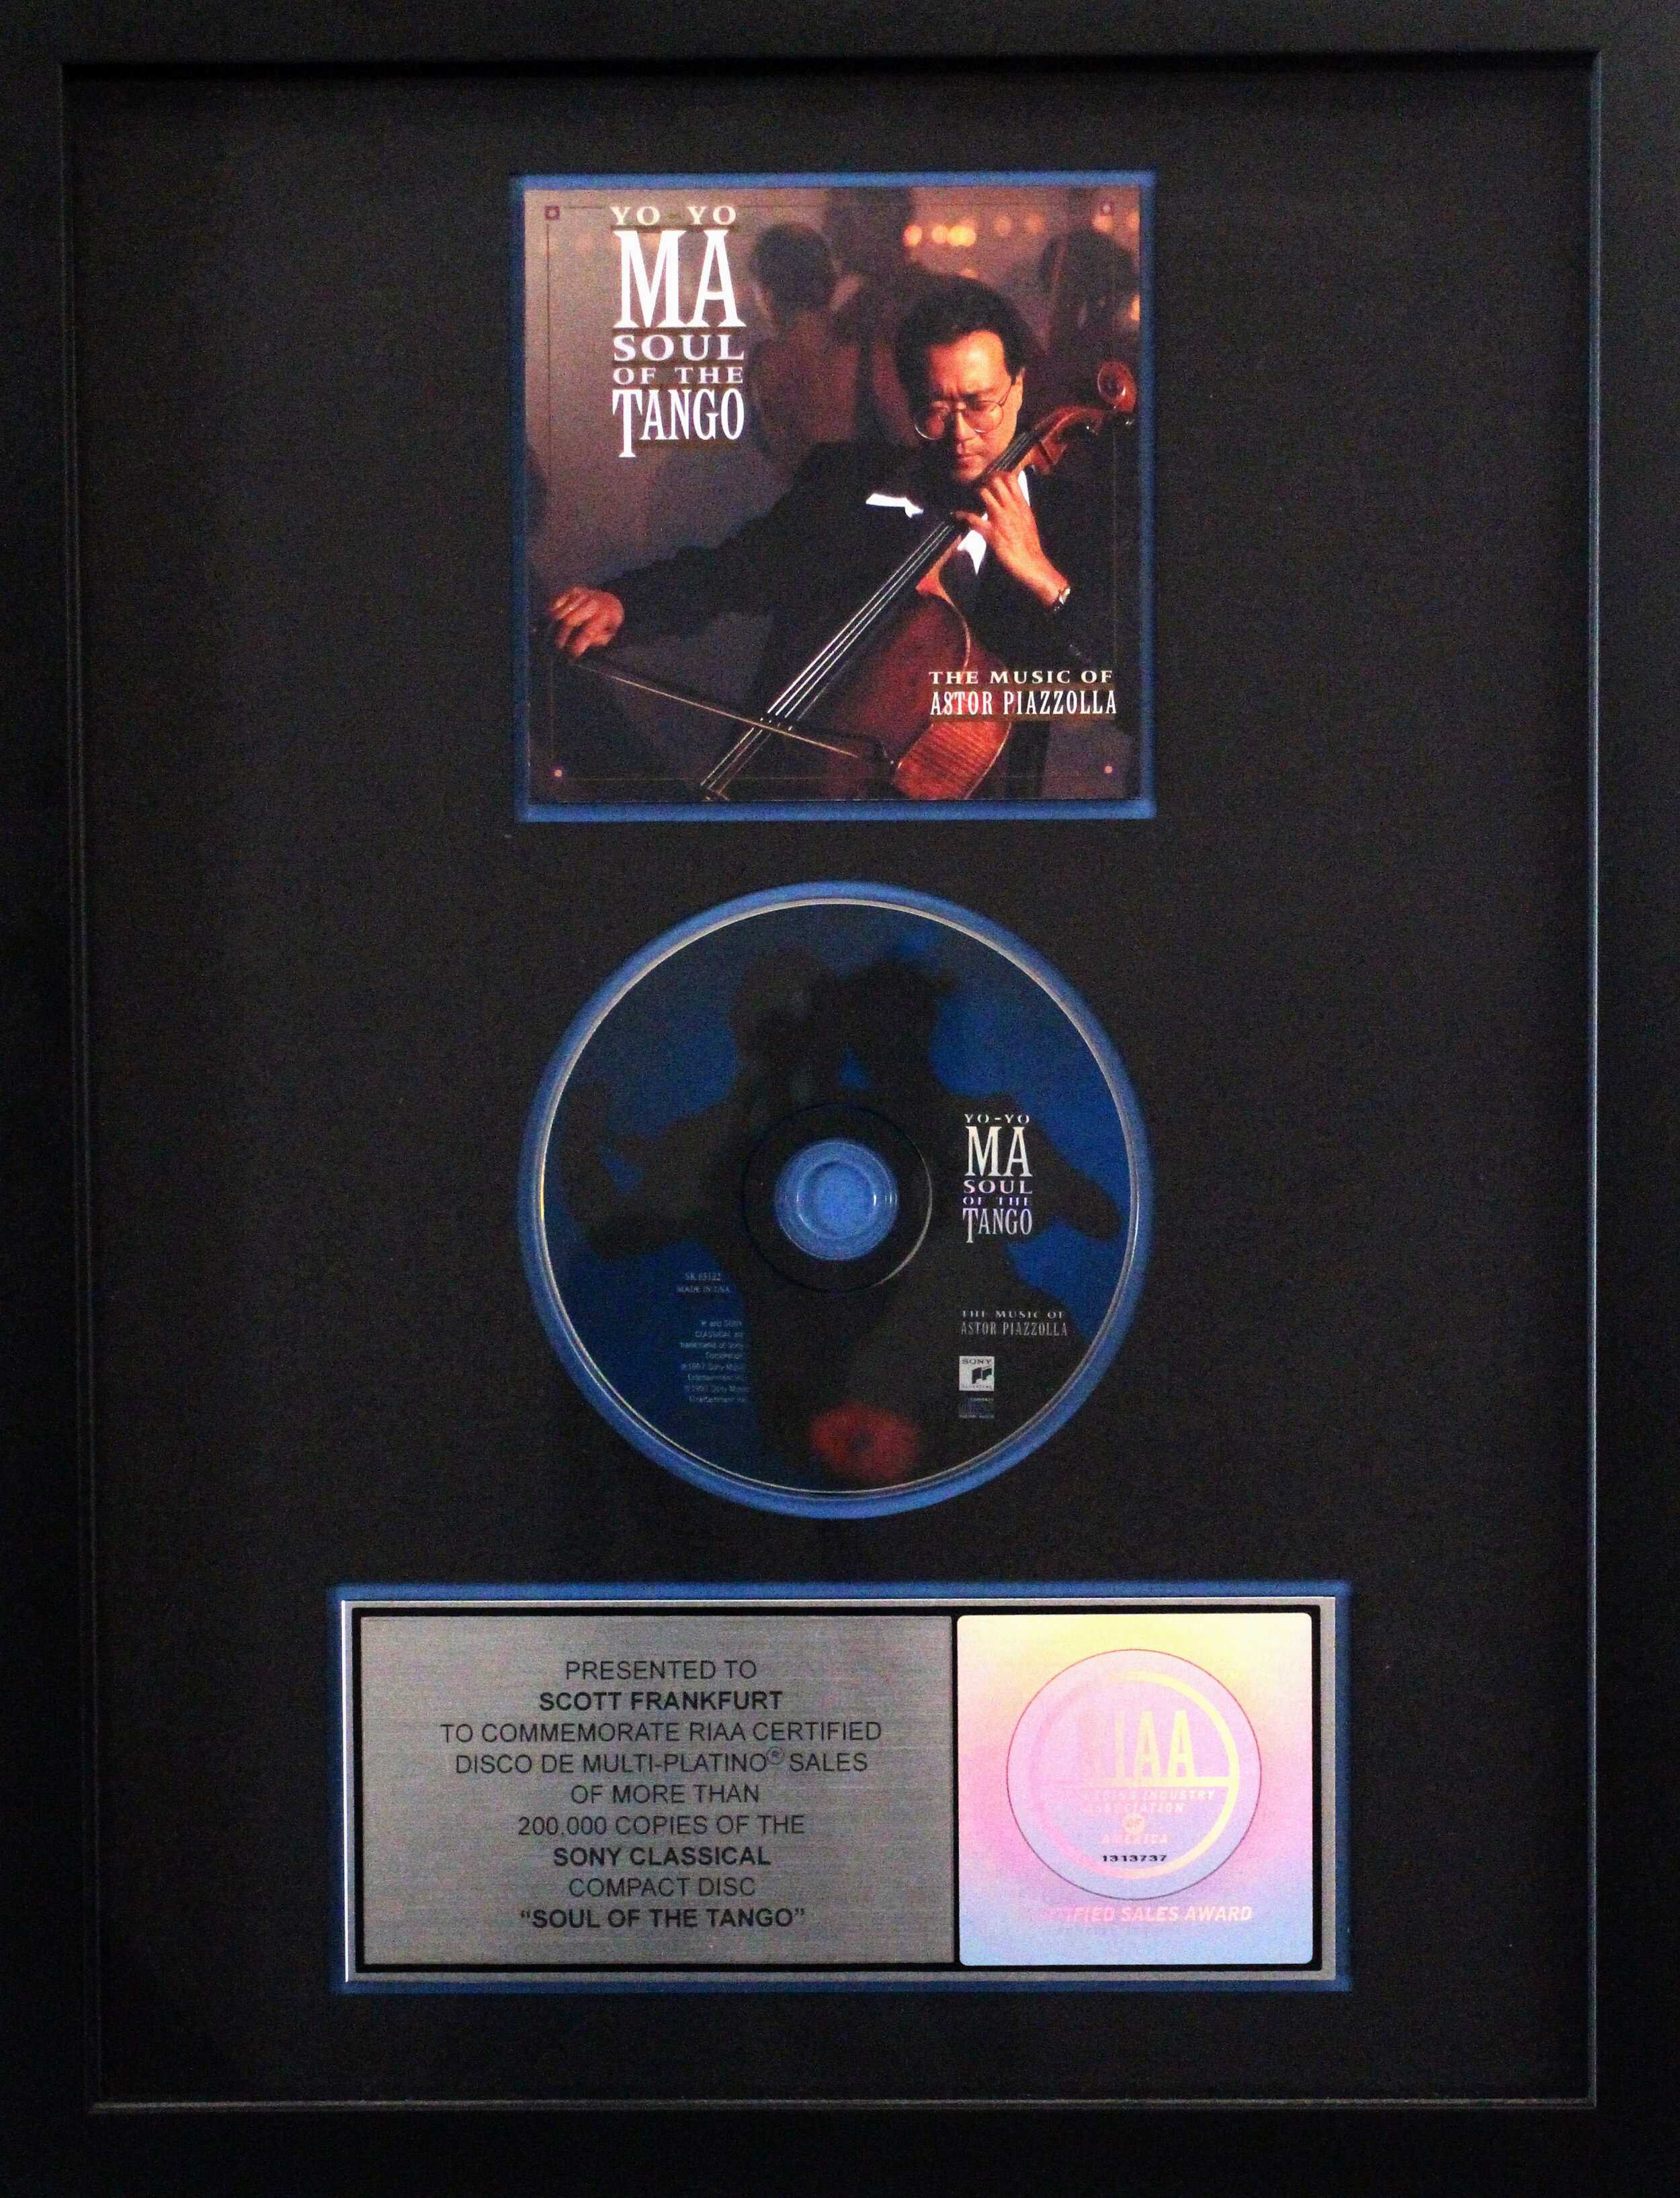 Platinum Award for THE SOUL OF THE TANGO